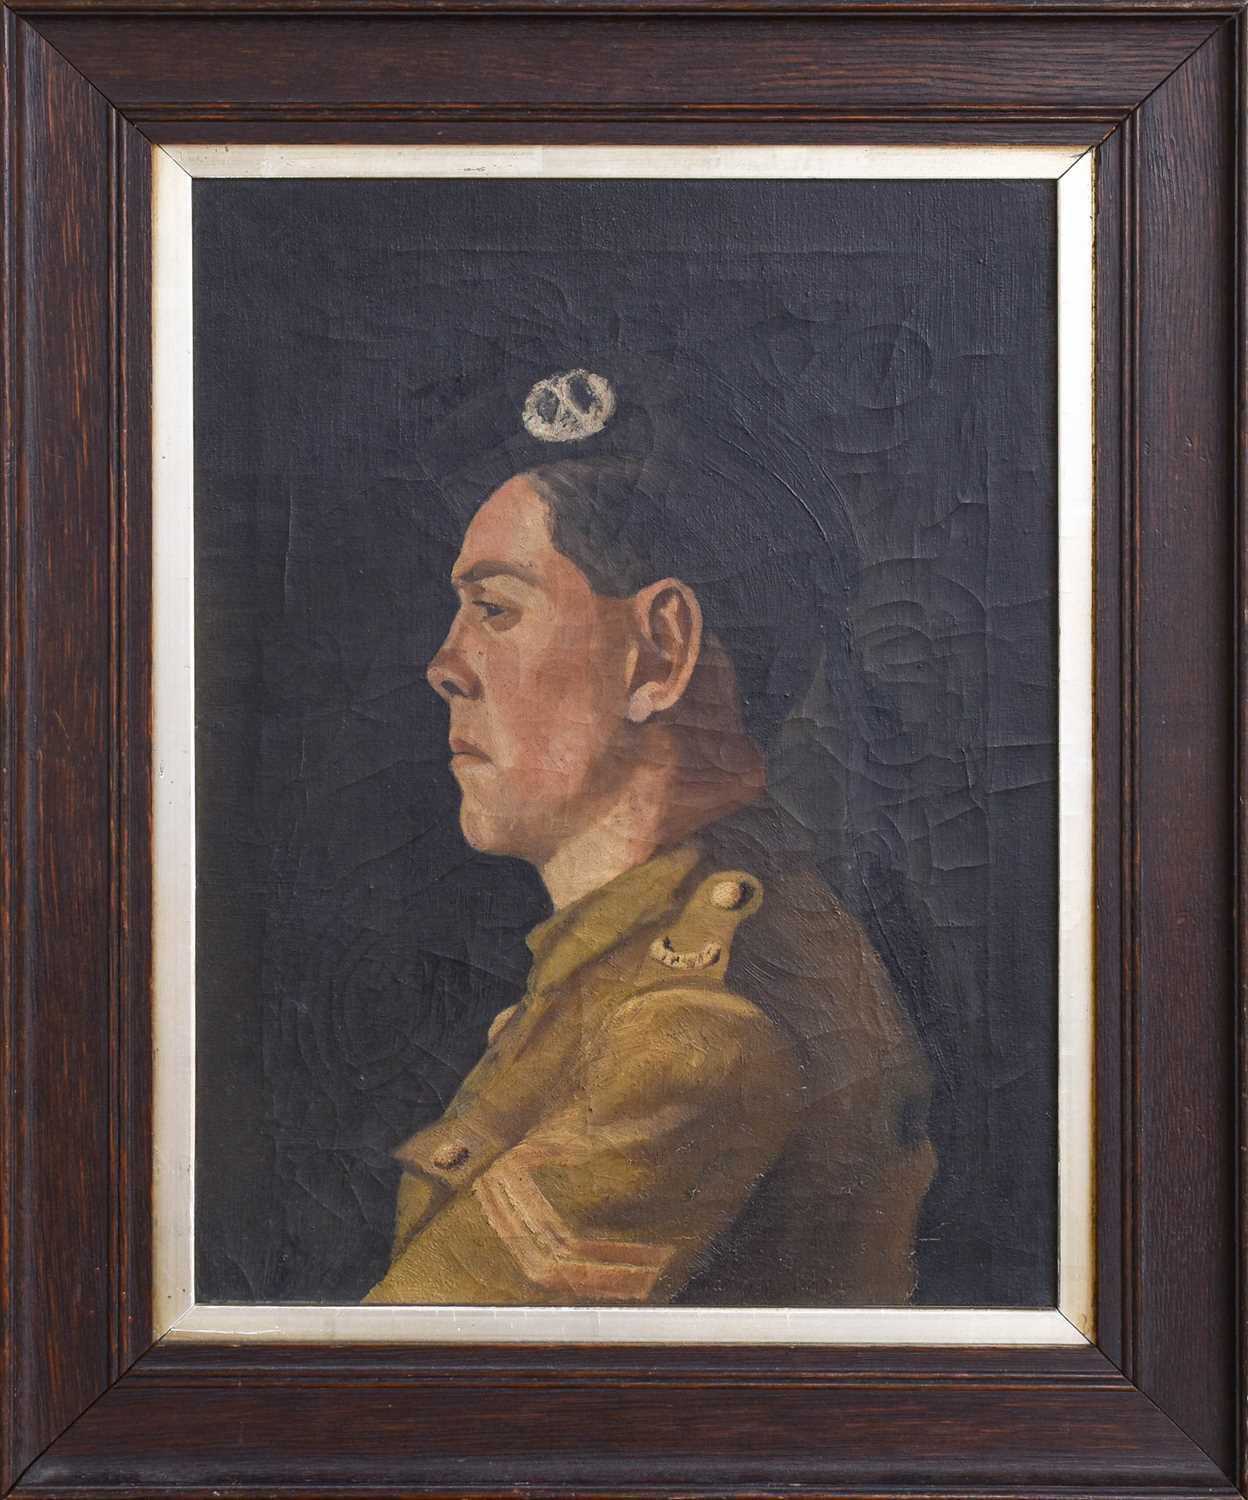 British School (20th Century) Portrait of a soldier in profile Oil on canvas, 39.5cm by 29.5cm - Image 2 of 2